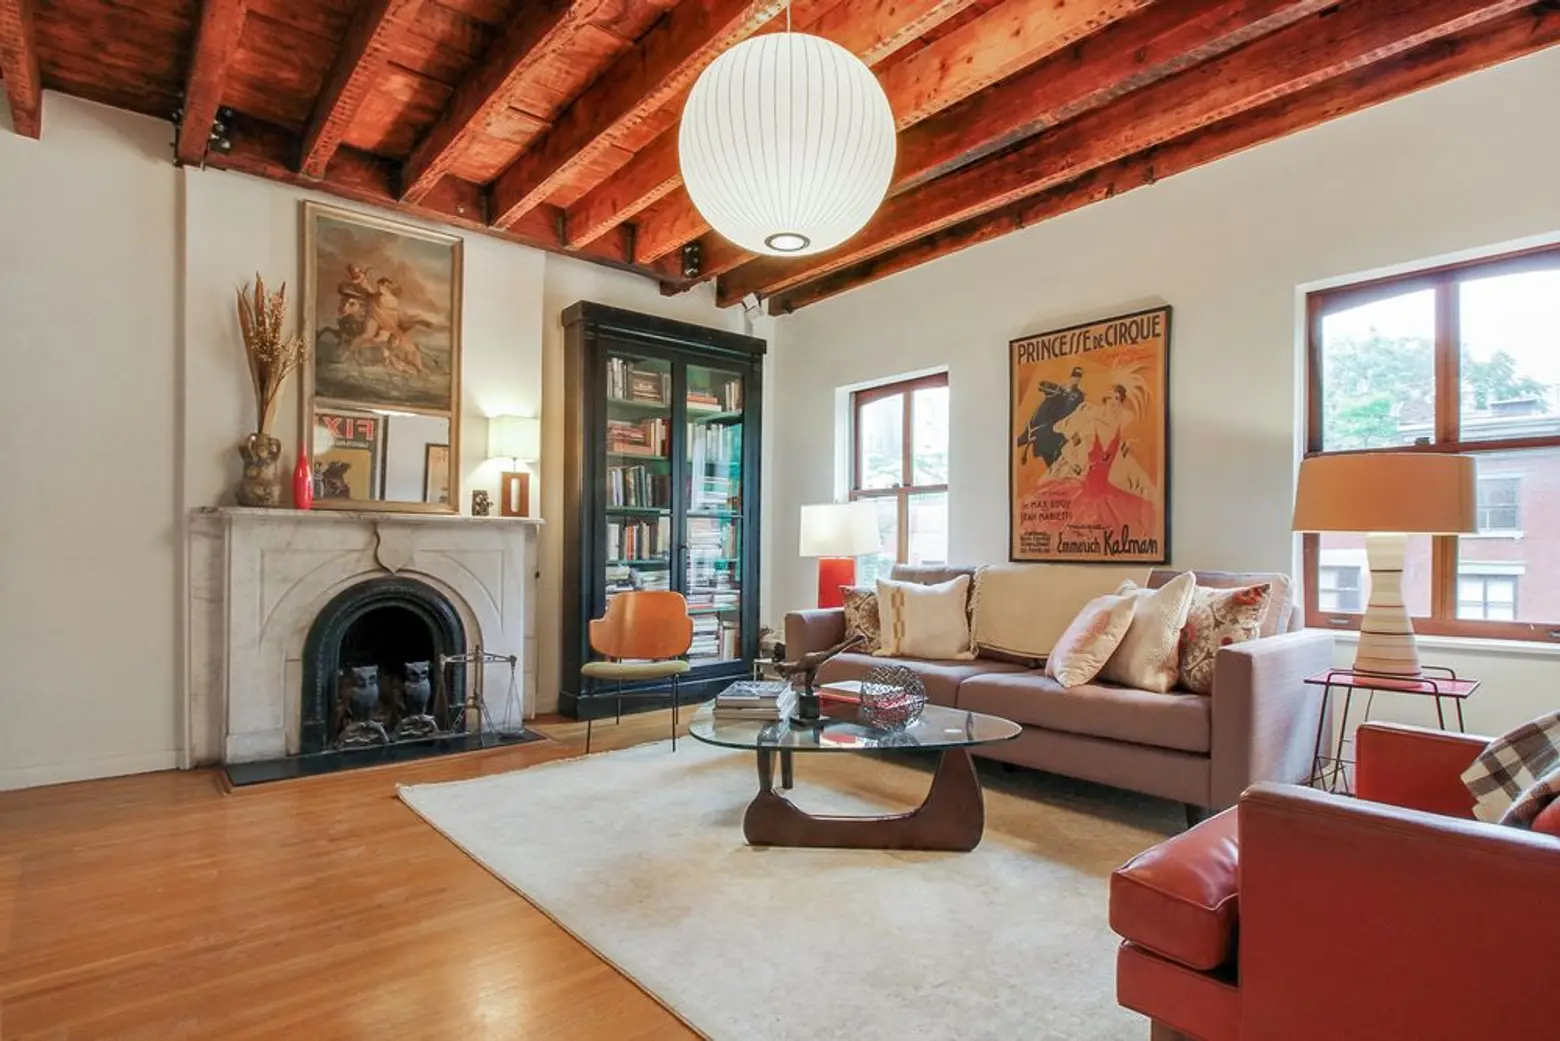 Live in Molly Ringwald’s Stylish East Village Duplex for $1.8M